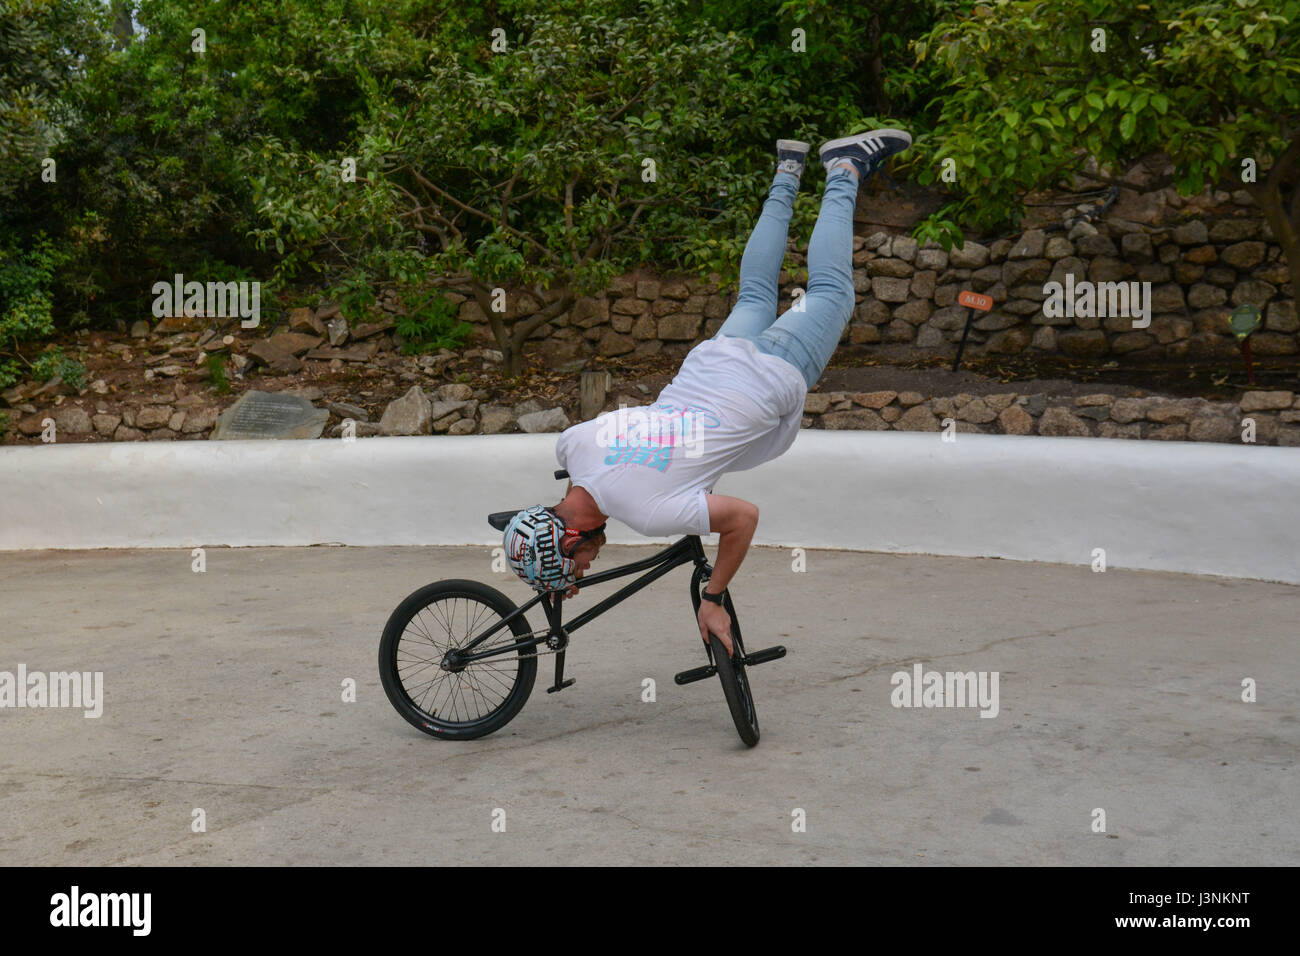 Eden Project, Cornwall UK. 7th May 2017. Matti Hemmings, pro BMX rider and Guiness world record holder, performing stunts at the Eden project today, whilst the classic sportive cycle ride was underway. Credit: Simon Maycock/Alamy Live News Stock Photo